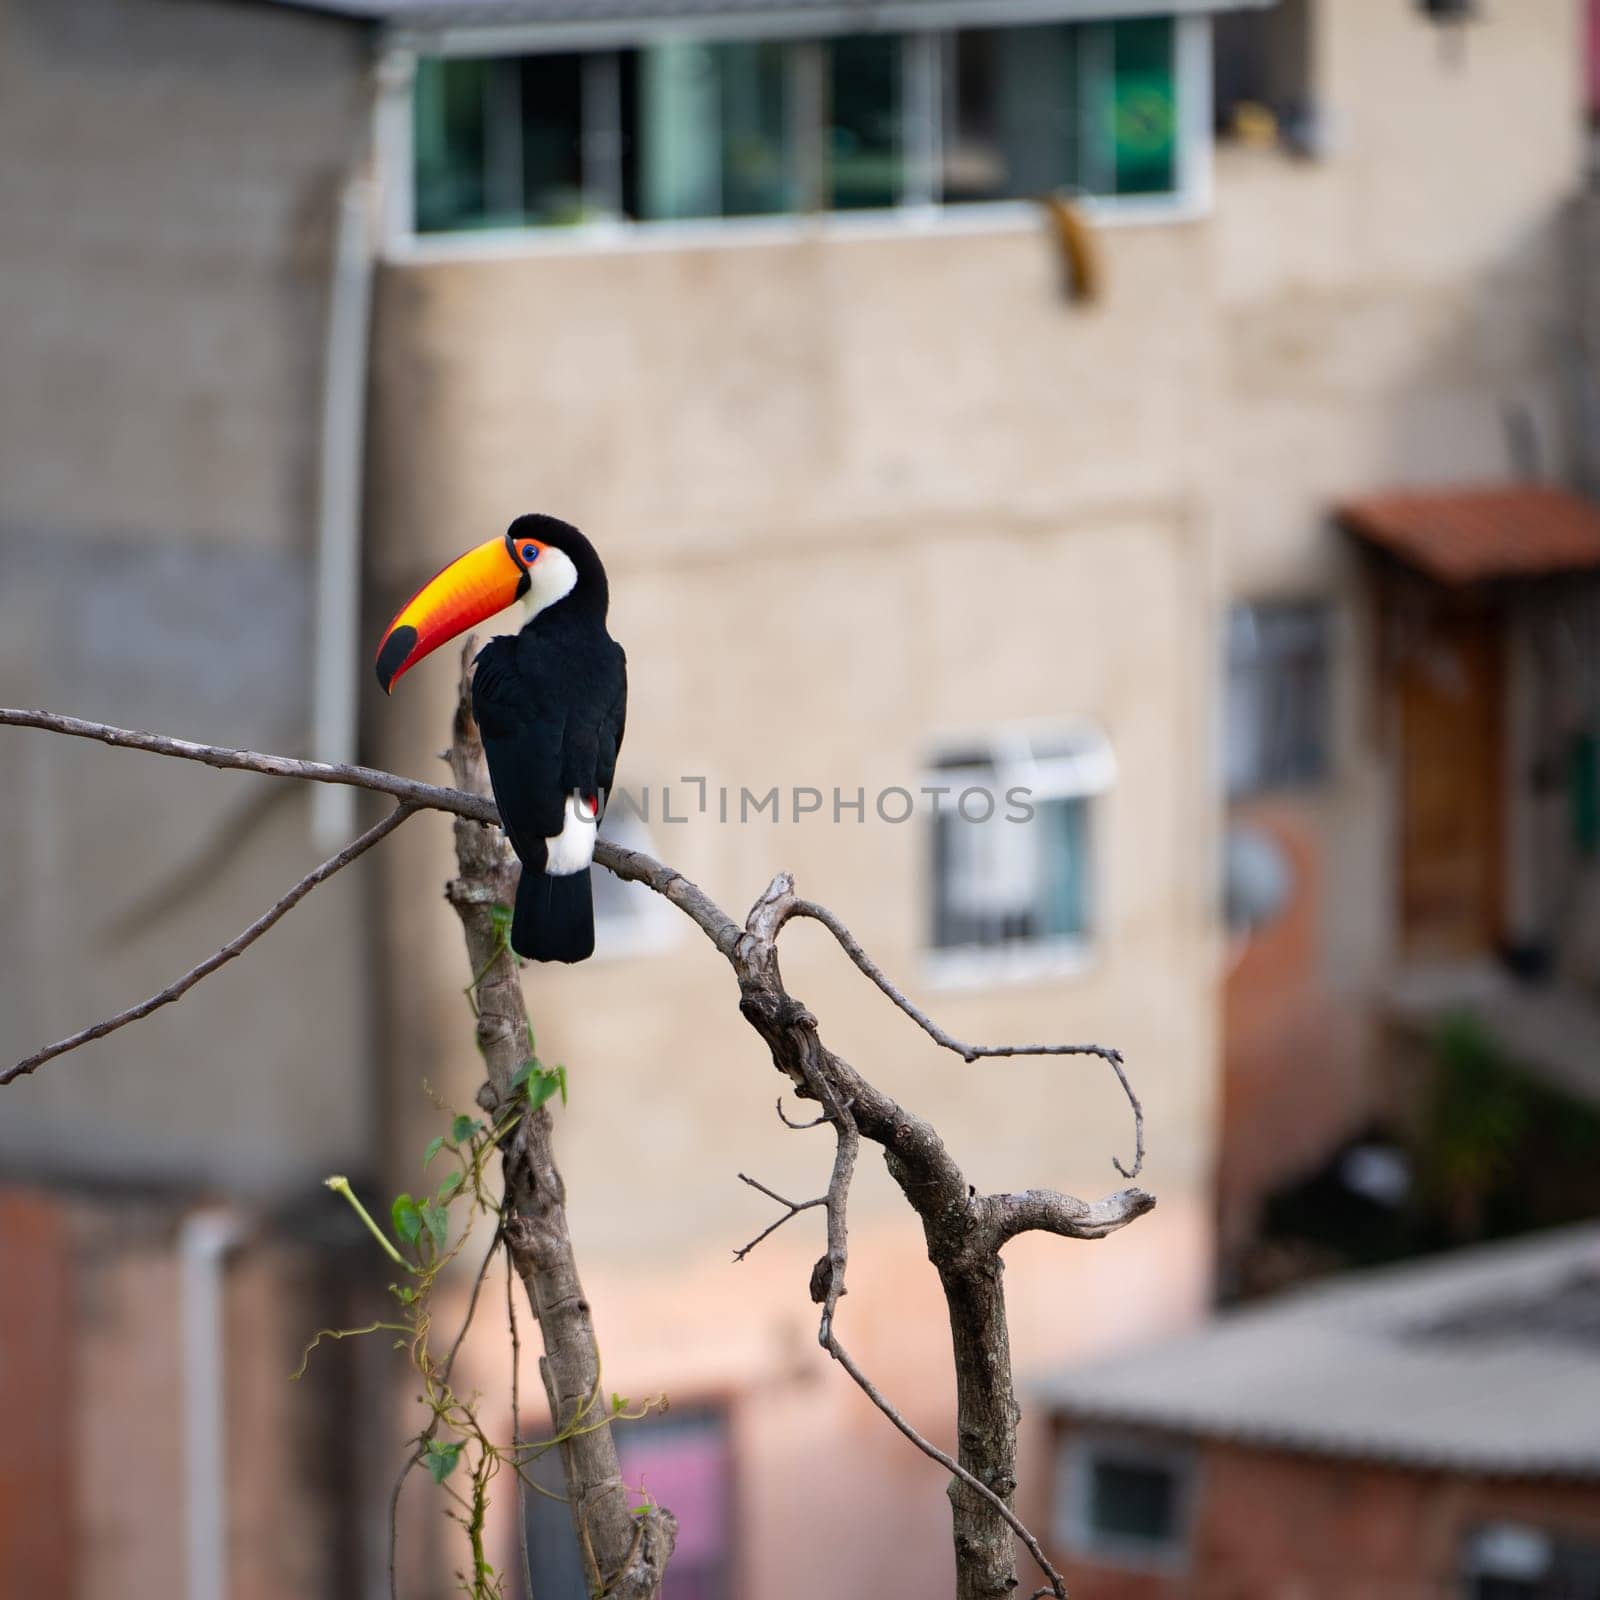 Colorful Toco Toucan Perched on a Bare Branch in Urban Area by FerradalFCG